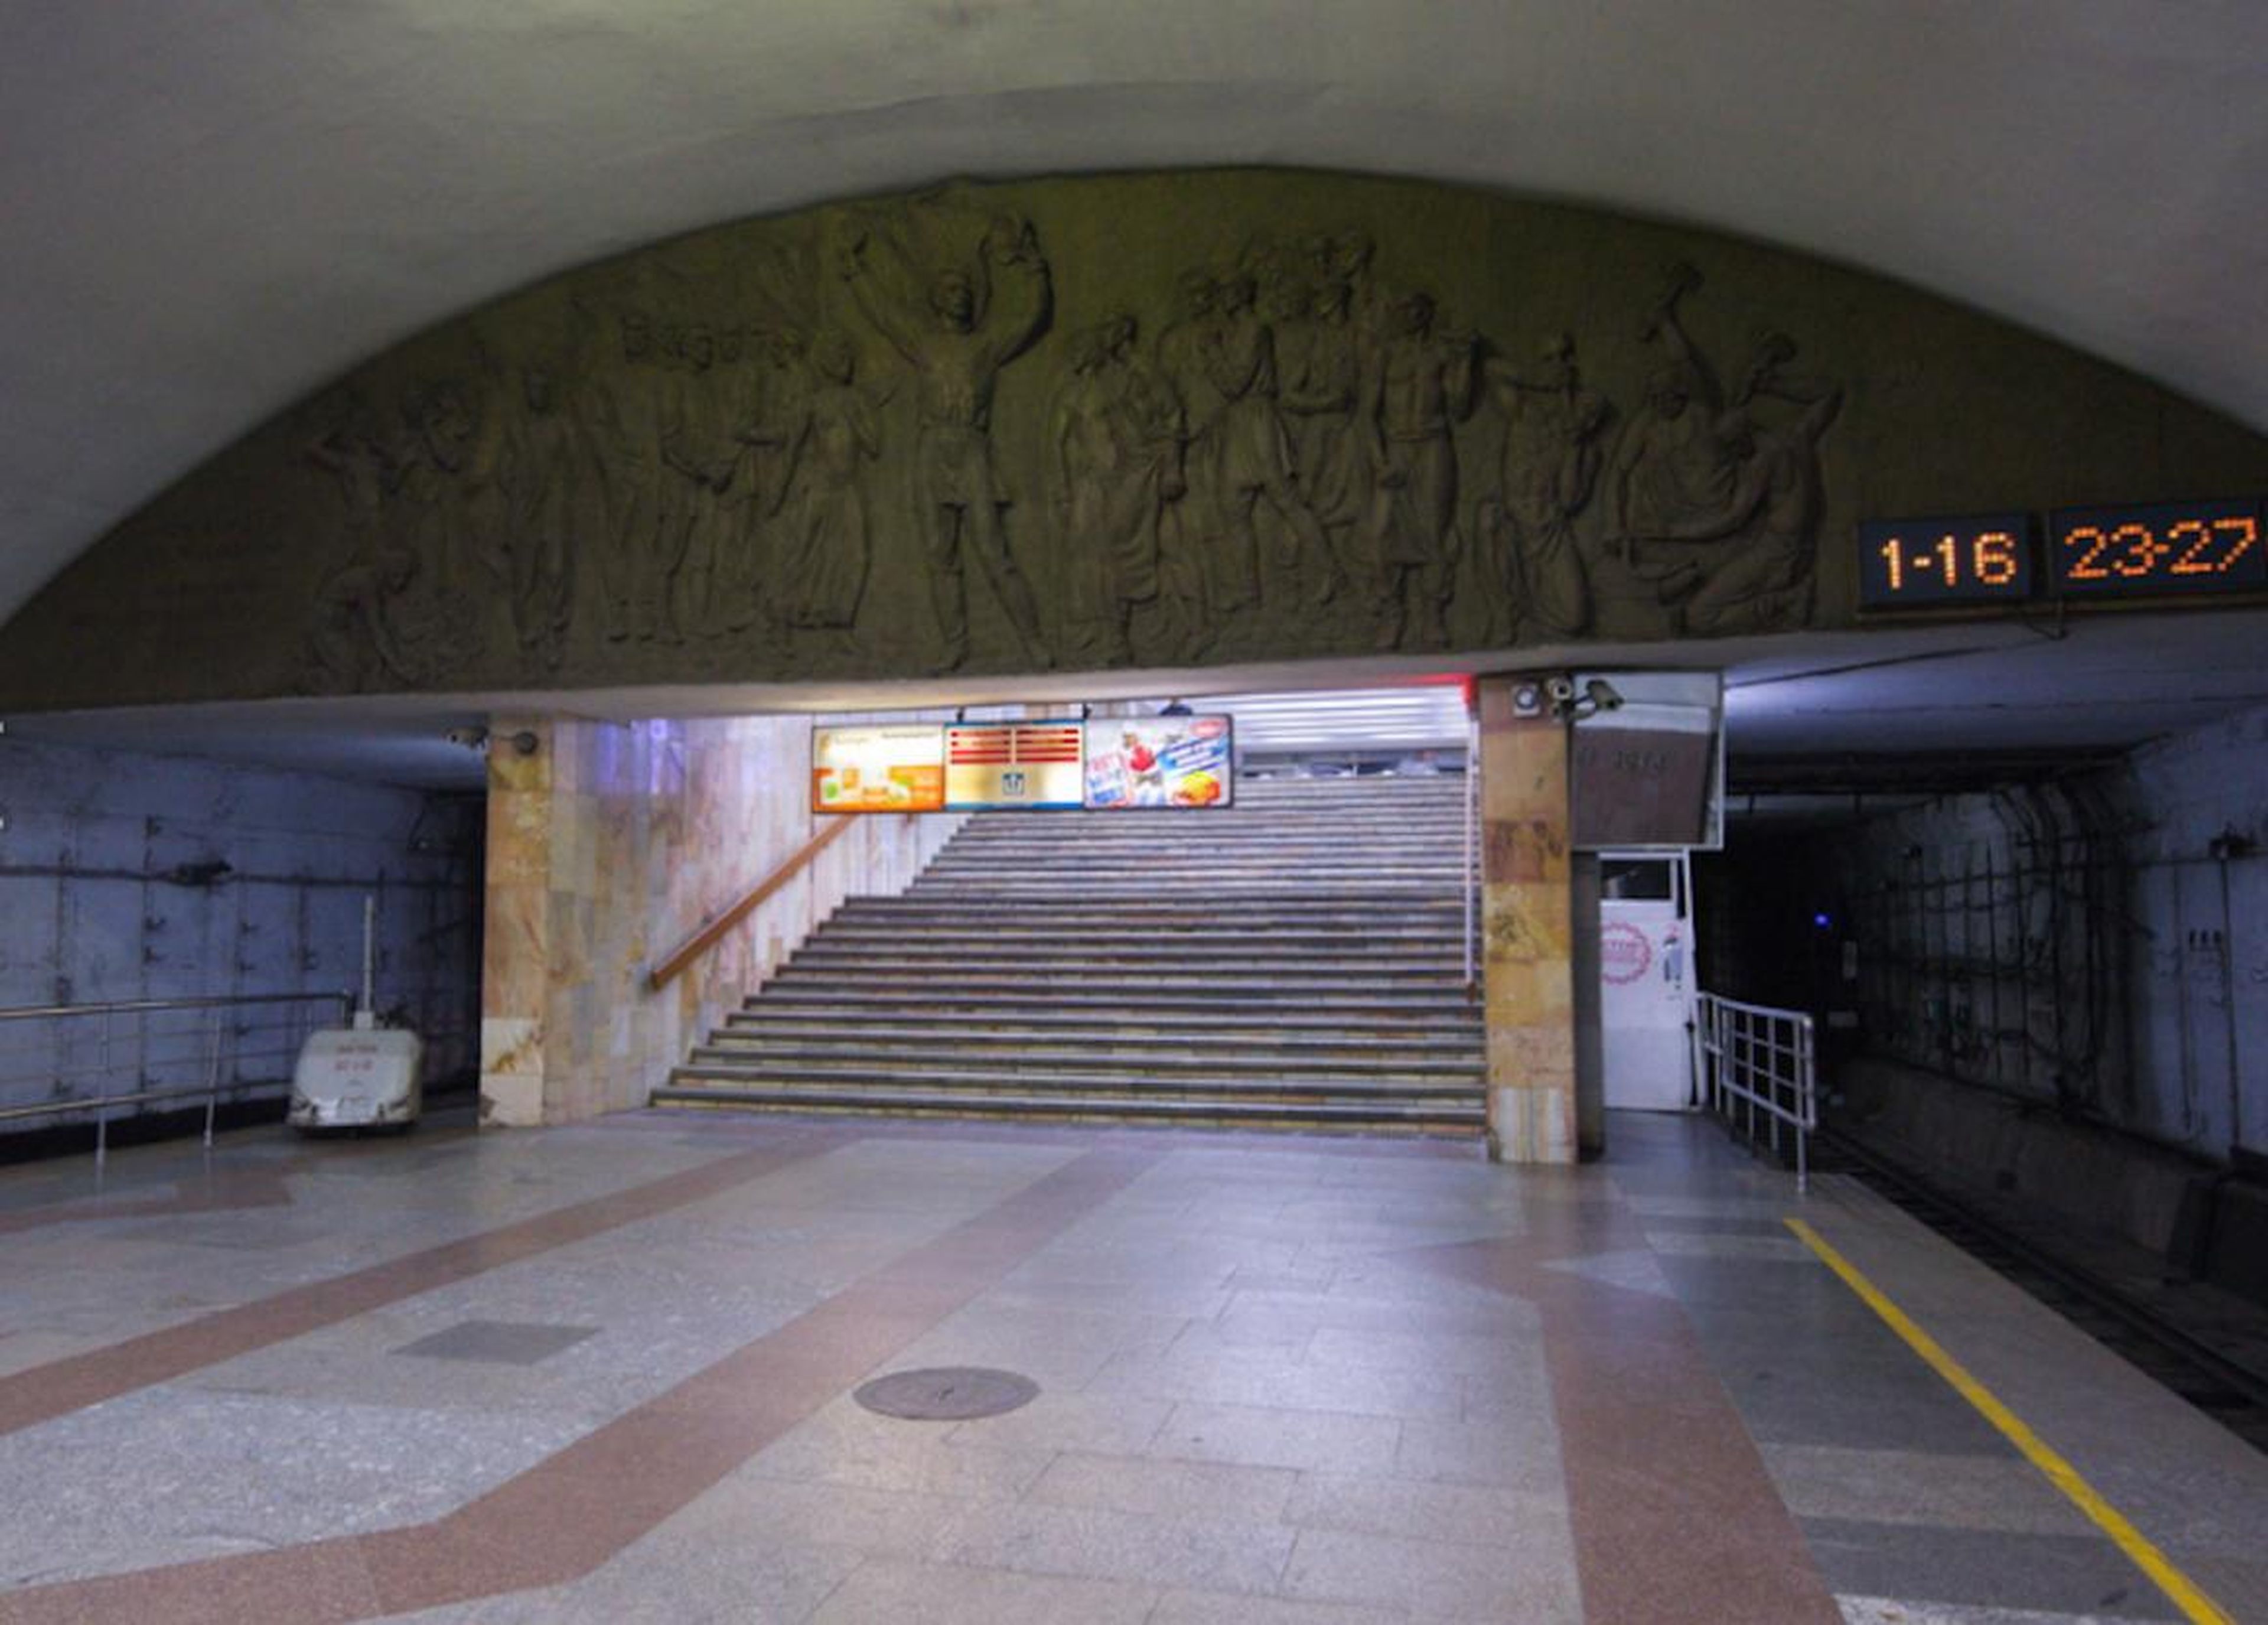 And the steps to and from the platform are wide enough for large crowds, with artwork above commuters' heads.